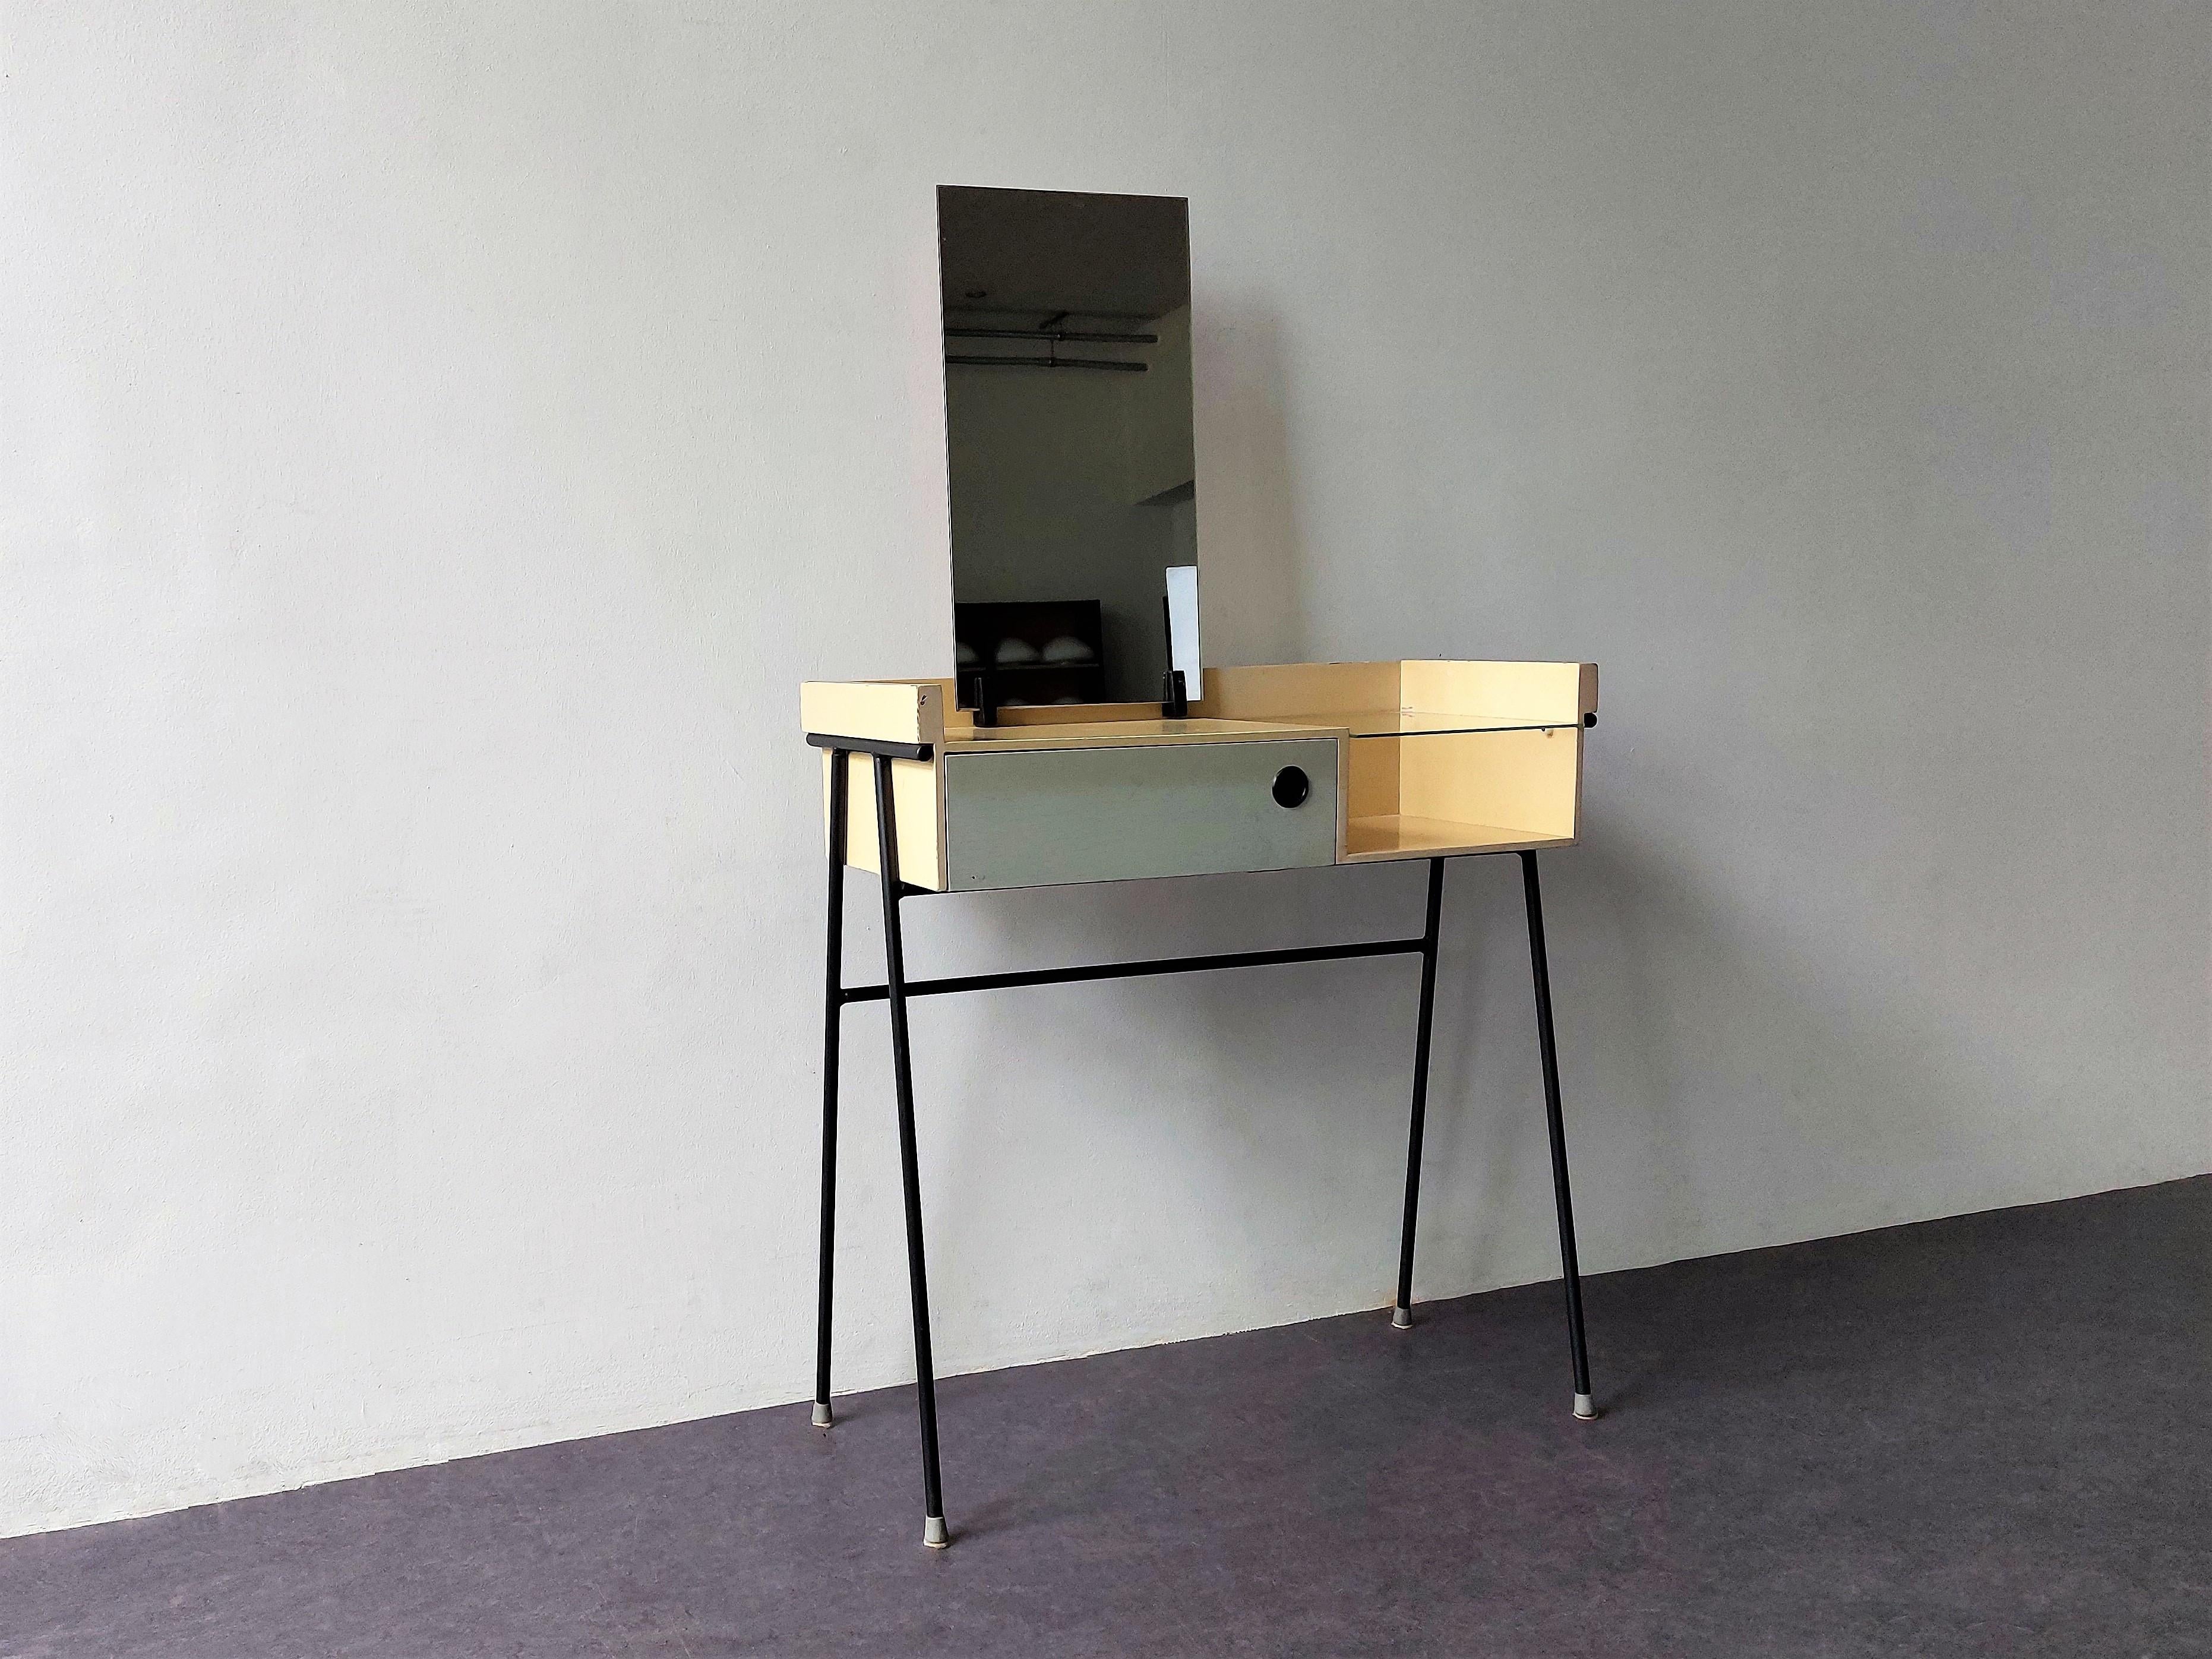 This rare dressing table was designed by Rob Parry for the former and renowned Dutch bed manufacturer DICO in the 1950's. This piece was part of the 'Kamer 56' (translated: Room '56) serie. The pastel colours and contrasting black details makes it a